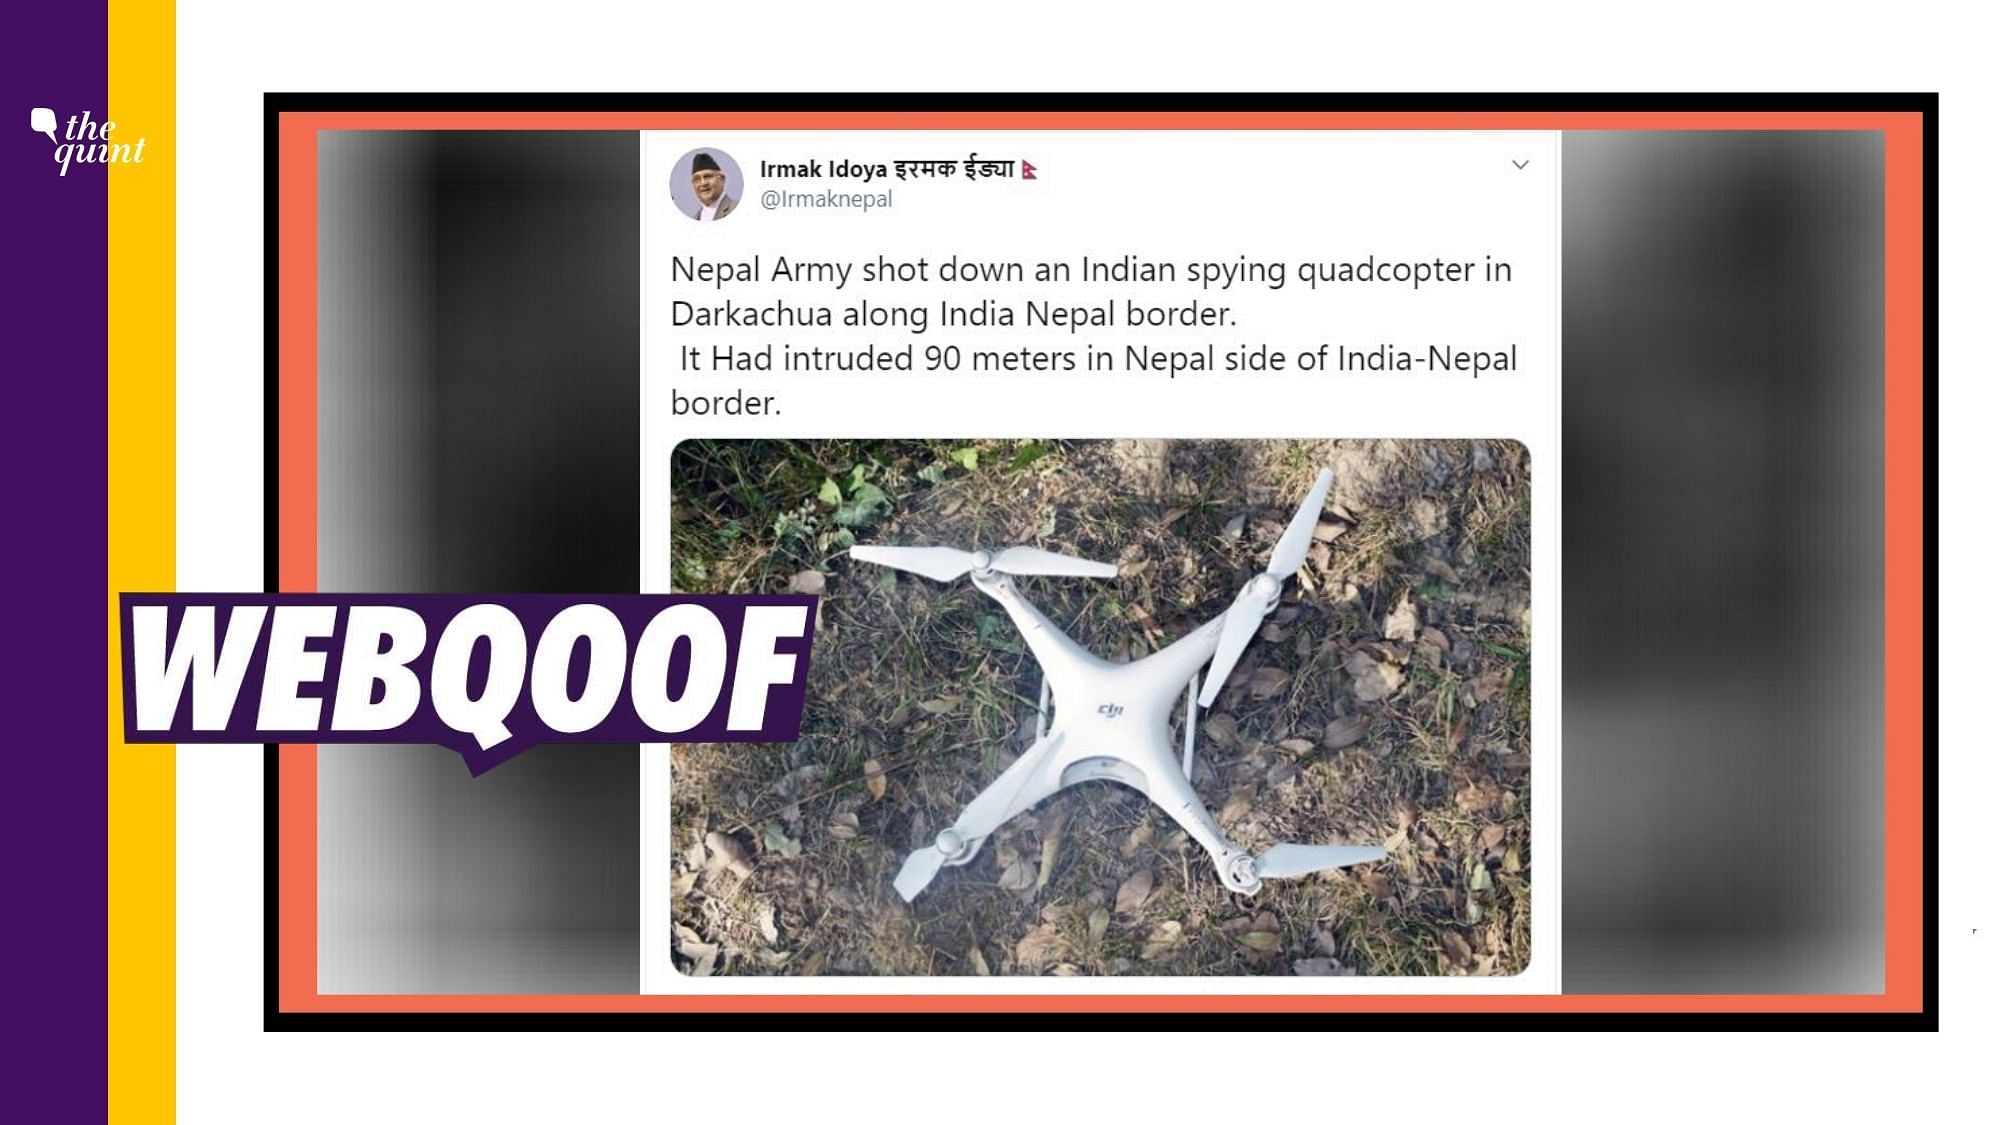 A viral image from 2017 is being shared on various social media platforms with a false claim that it shows an Indian spying quadcopter shot down by the Nepalese army.